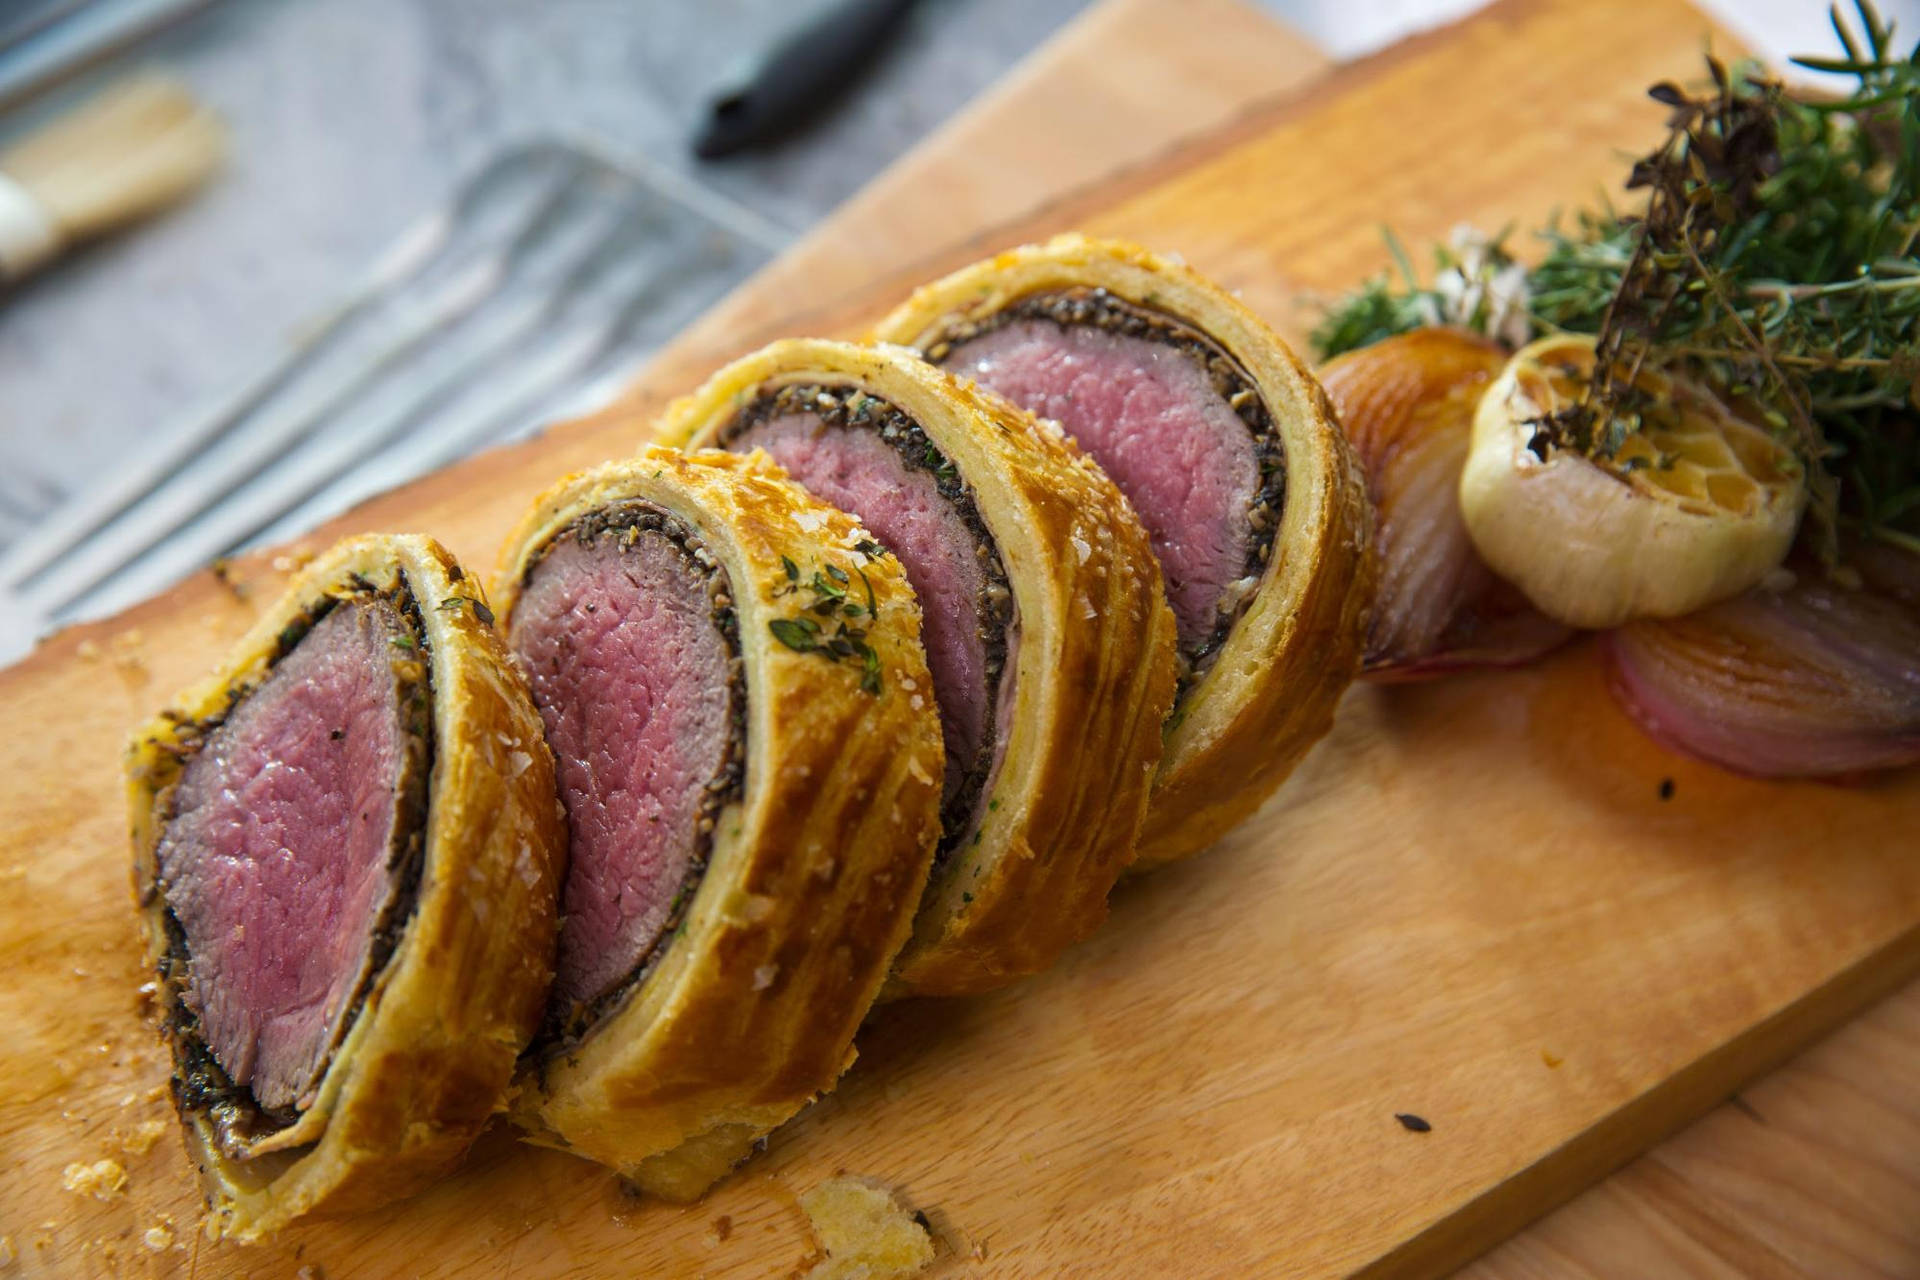 Gourmet Beef Wellington garnished with Garlic and Rosemary Wallpaper